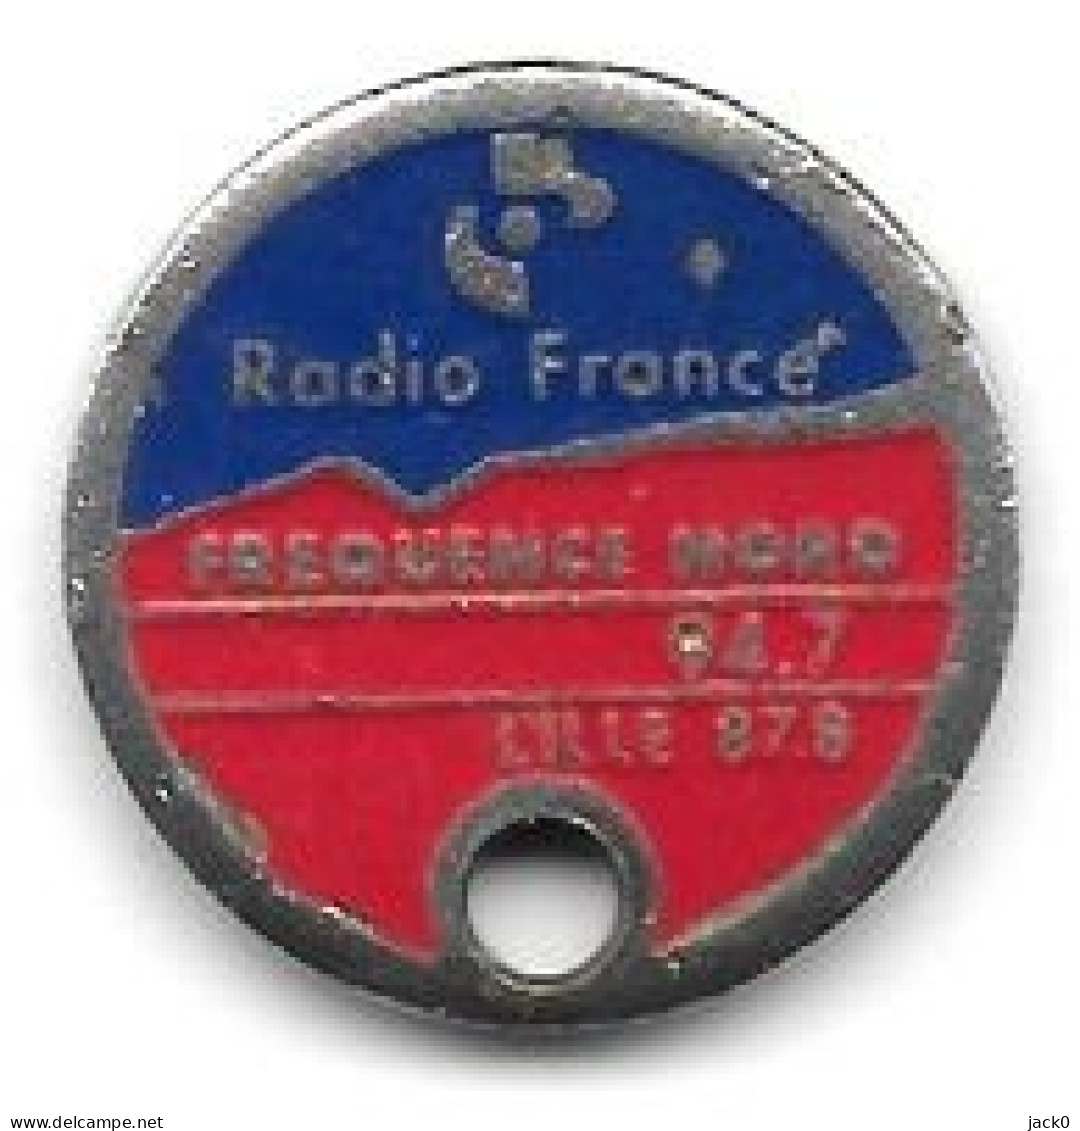 Jeton De Caddie  Occasion  Média, RADIO  FRANCE  FREQUENCE  NORD  Verso  94.7  LILLE  87.8 - Trolley Token/Shopping Trolley Chip